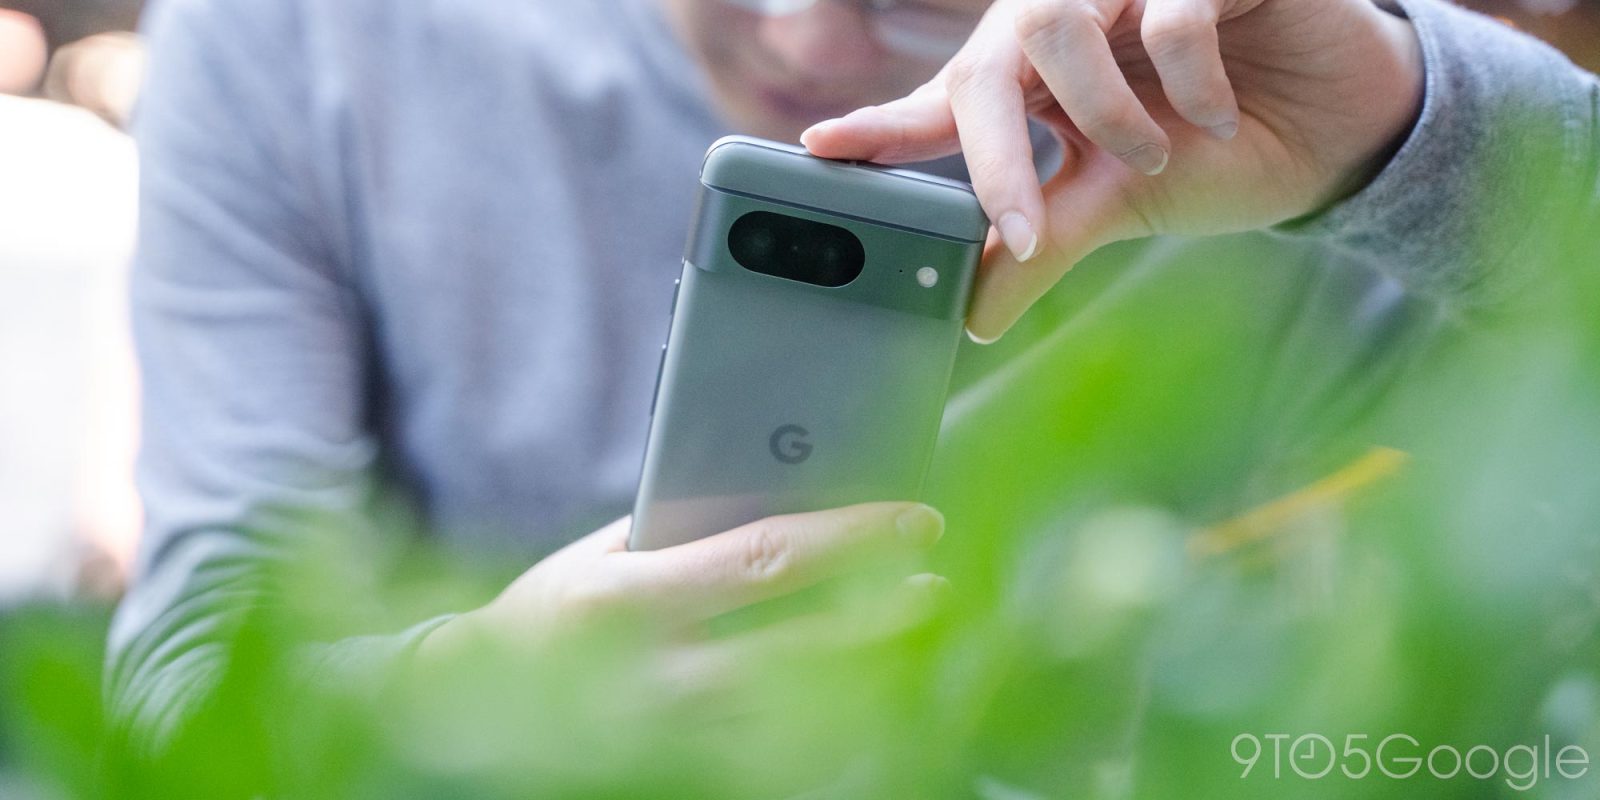 Google Pixel 5 review: Less is more. In fact, it's exceptional